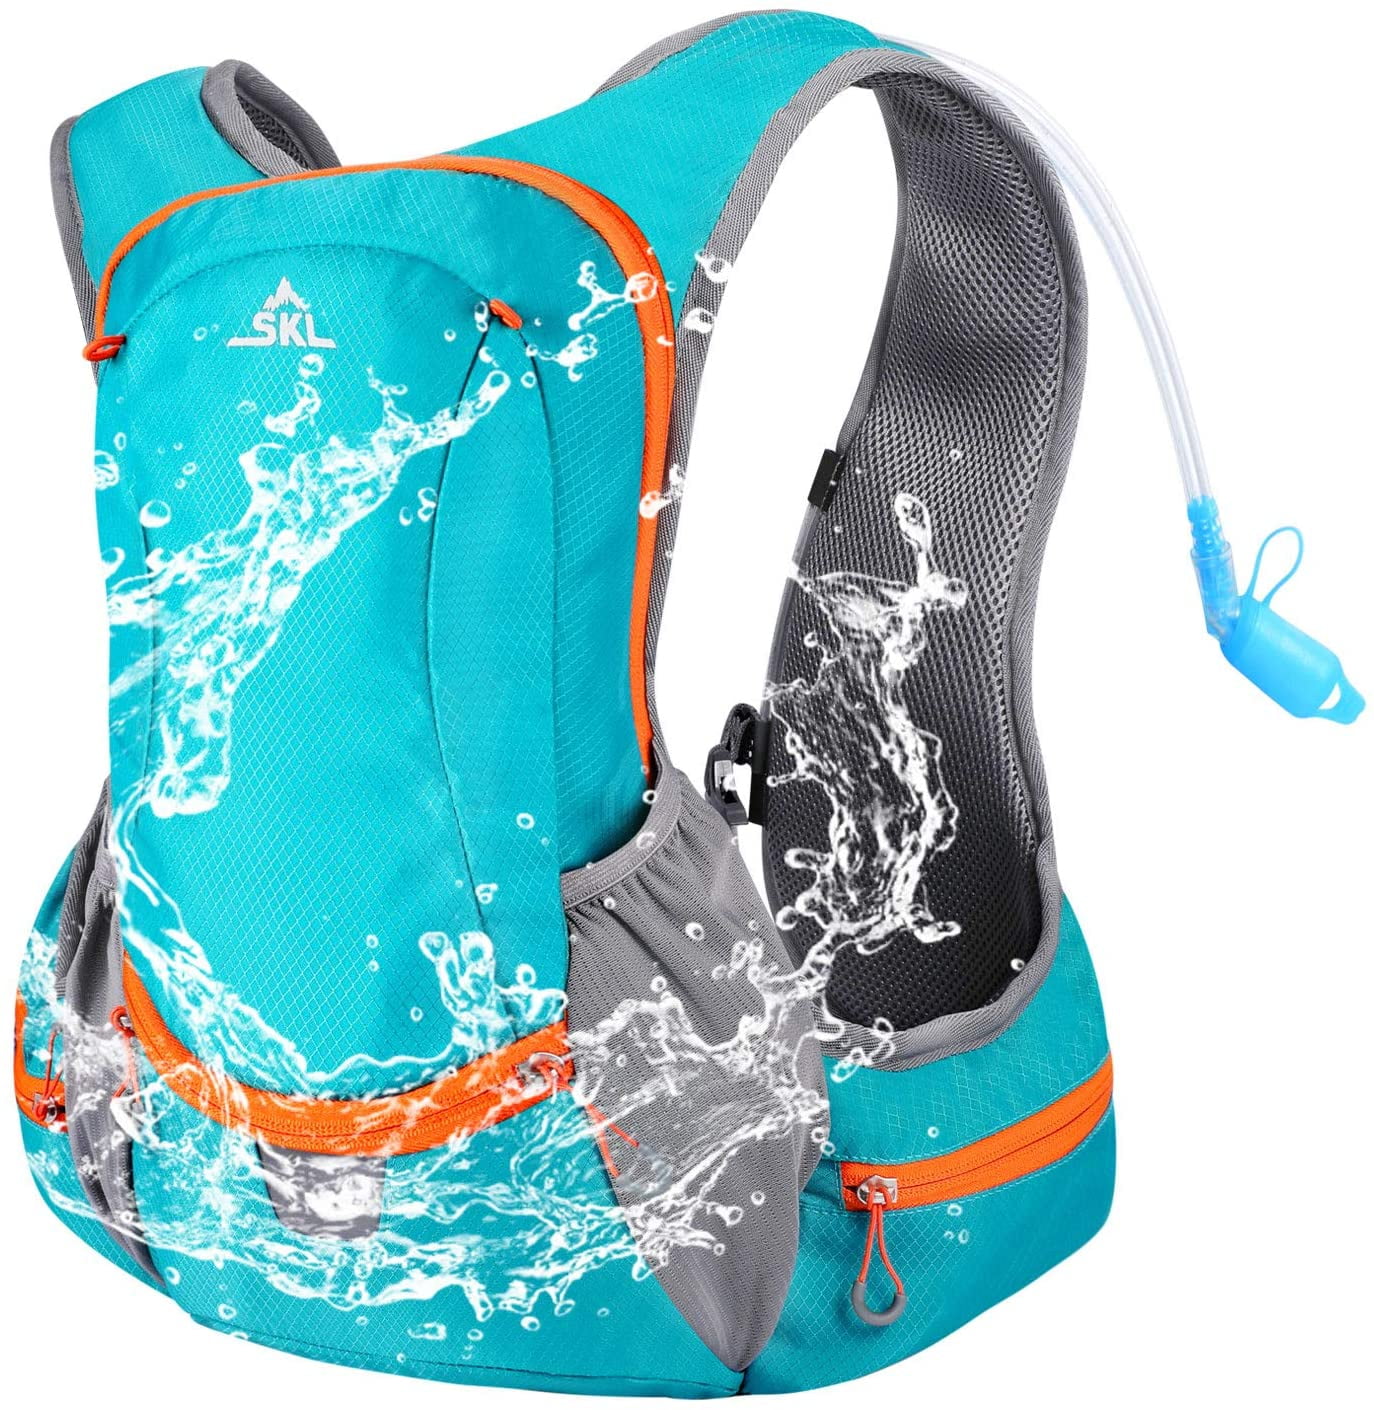 Light Weight Adjustable Waist Outdoor Gear for Cycling Hiking Running Climbing BPA Free Hydration Backpack with 2L Water Bladder Outdoors Hydration Pack 